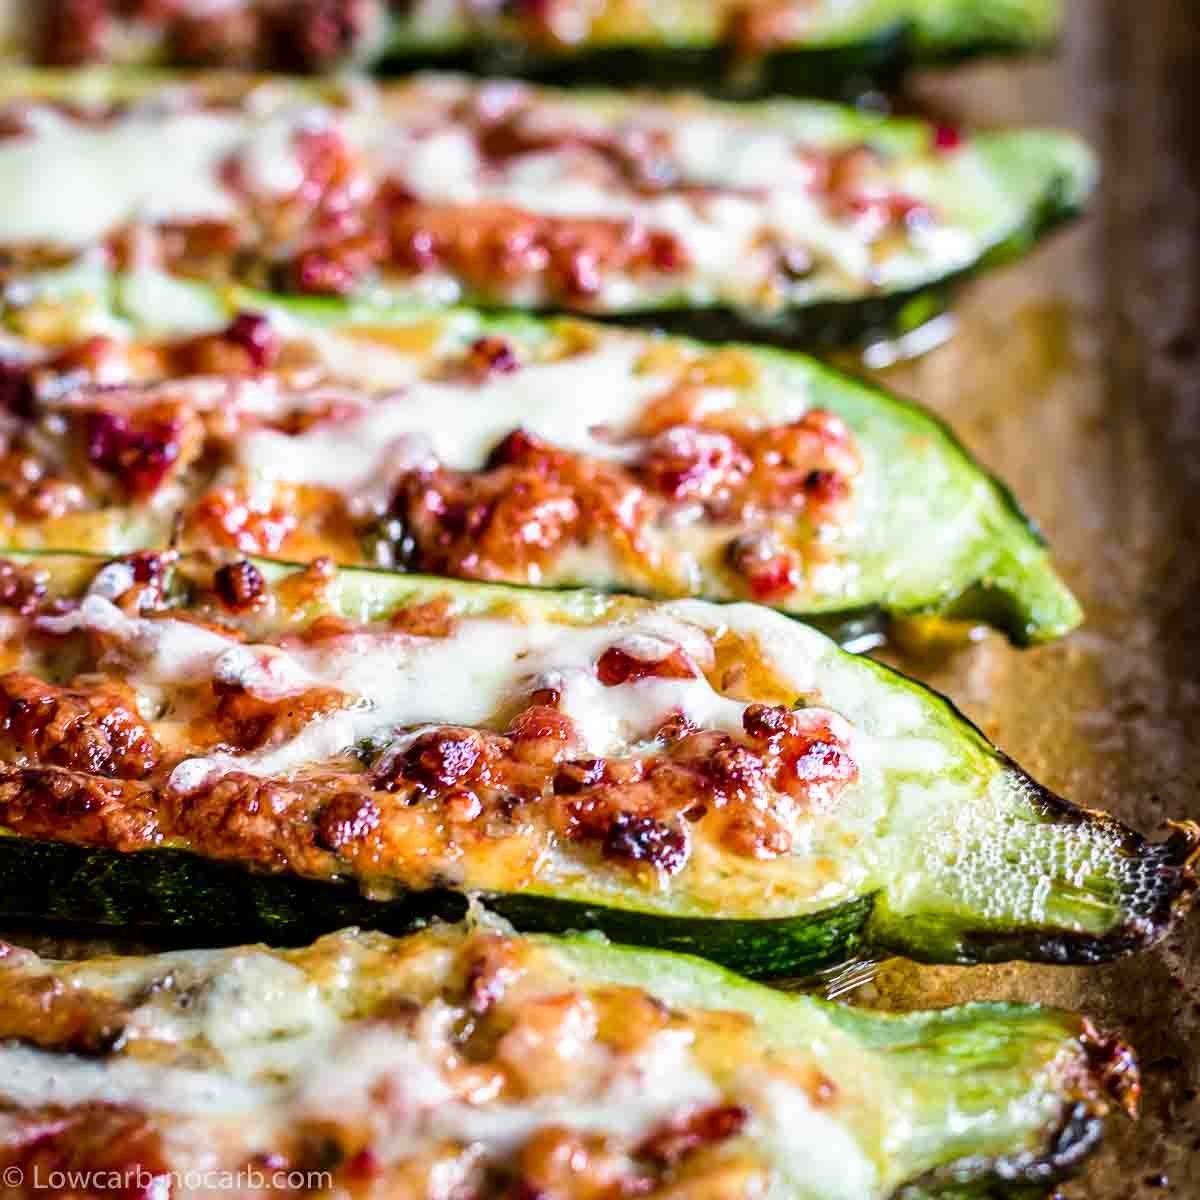 Spice Up Your Veggies: Stuffed Vegetable Recipes That Will Change Your Life